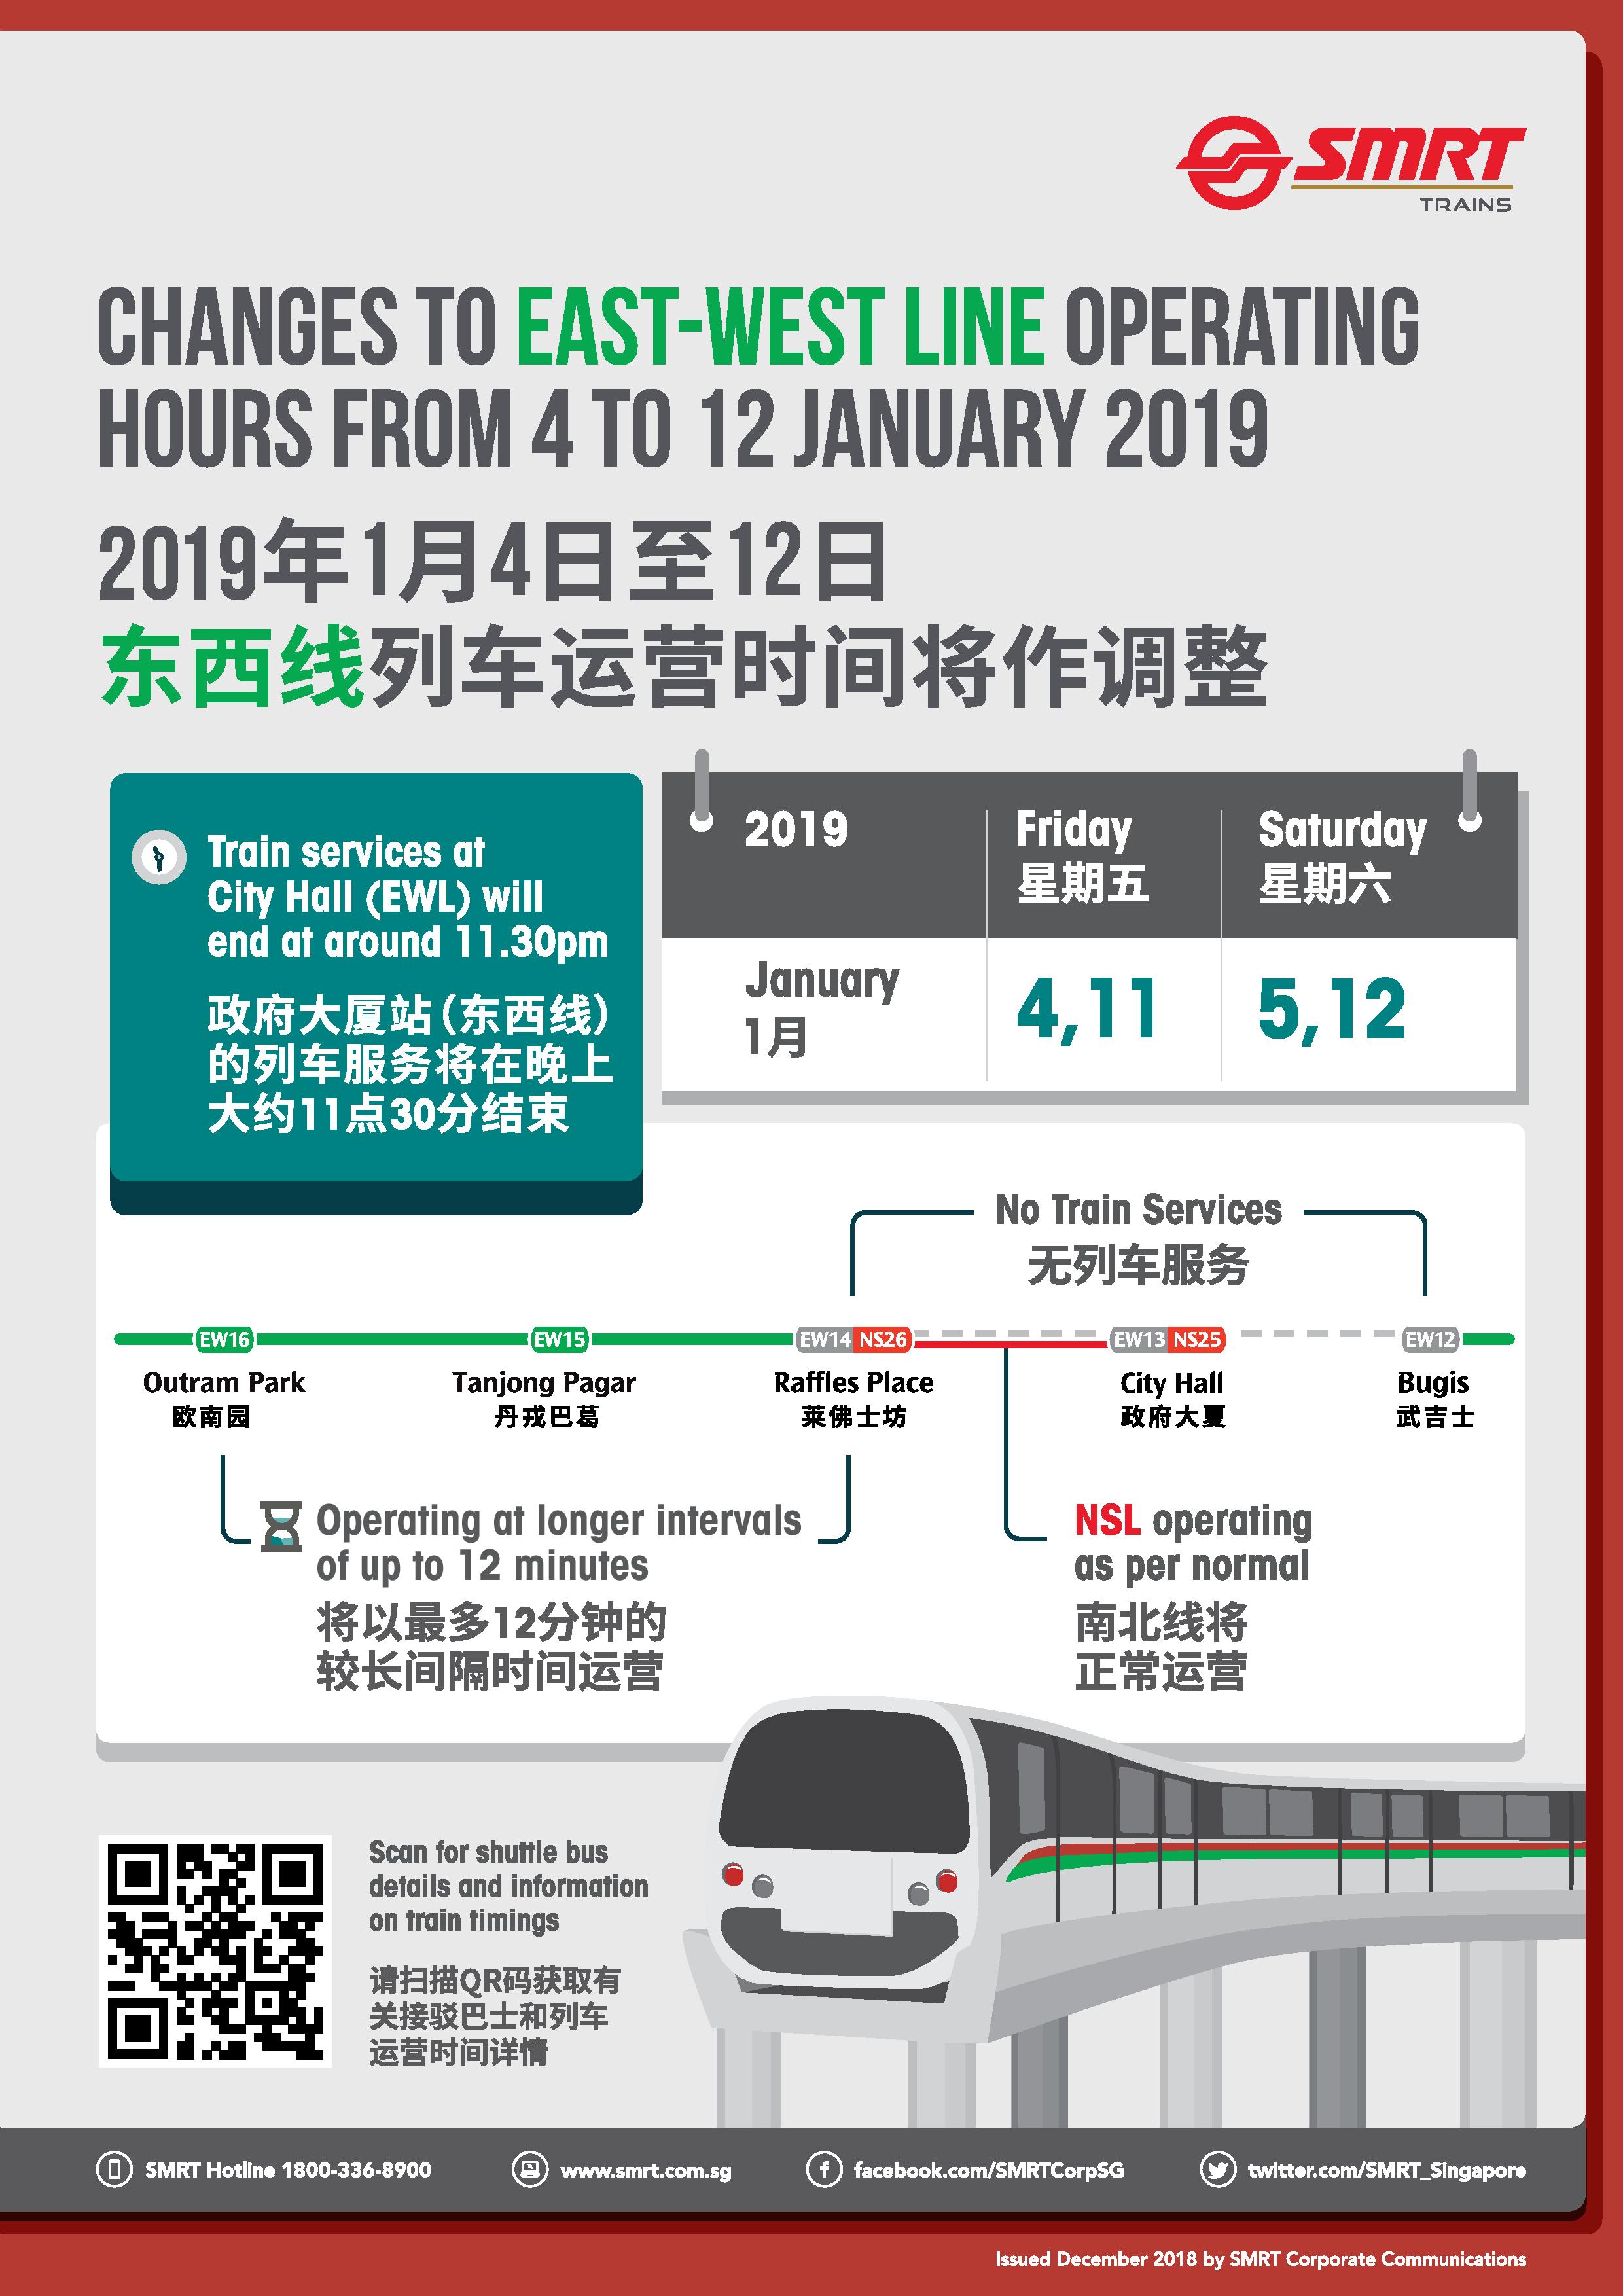 Early Closure Of Mrt Stations On North South And East West Lines From 30 November 2018 To 12 January 2019